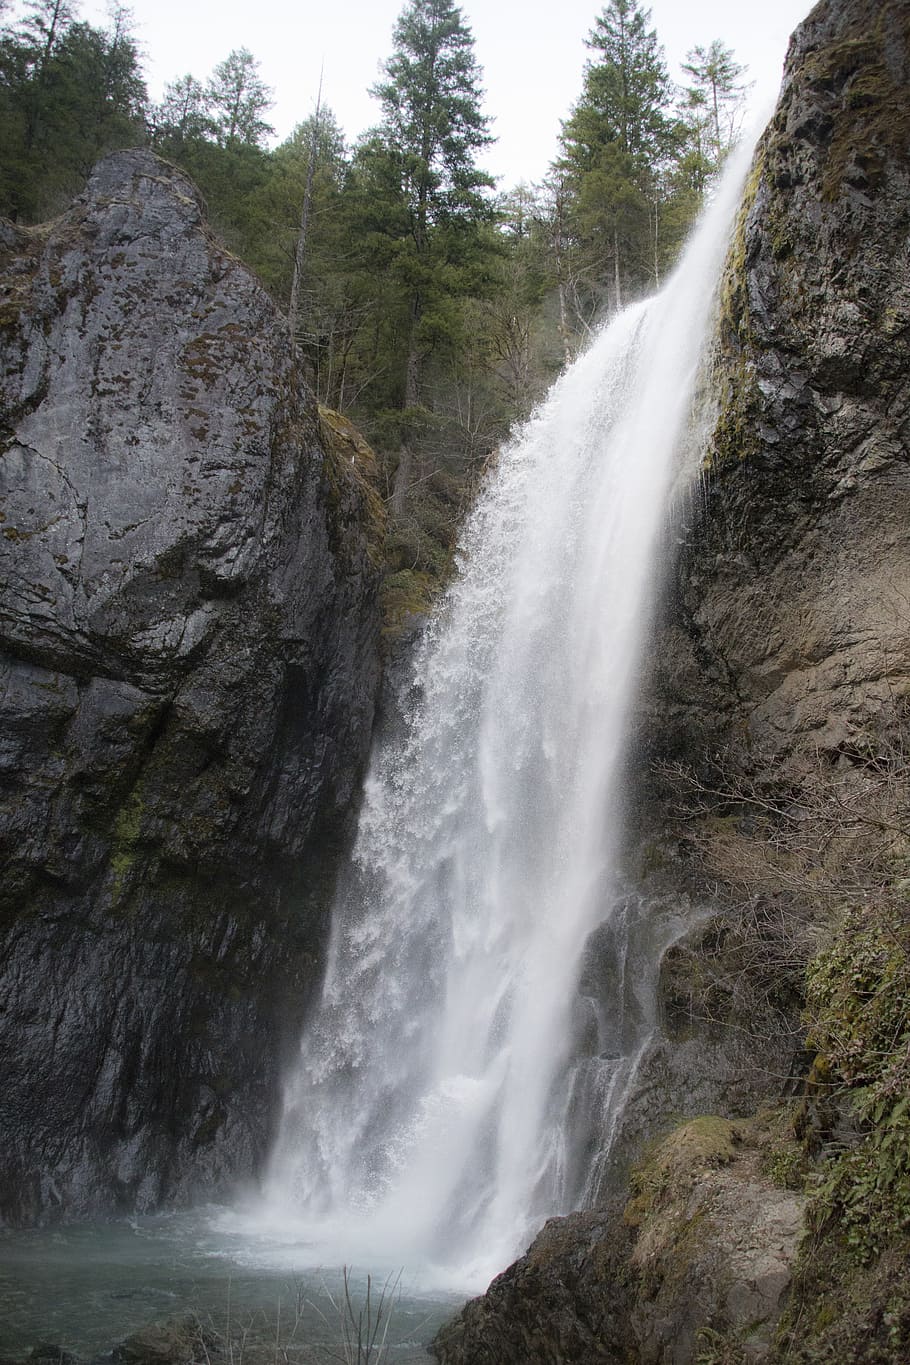 Falls, Oregon, waterfall between forest, scenics - nature, rock, water, beauty in nature, waterfall, rock - object, solid